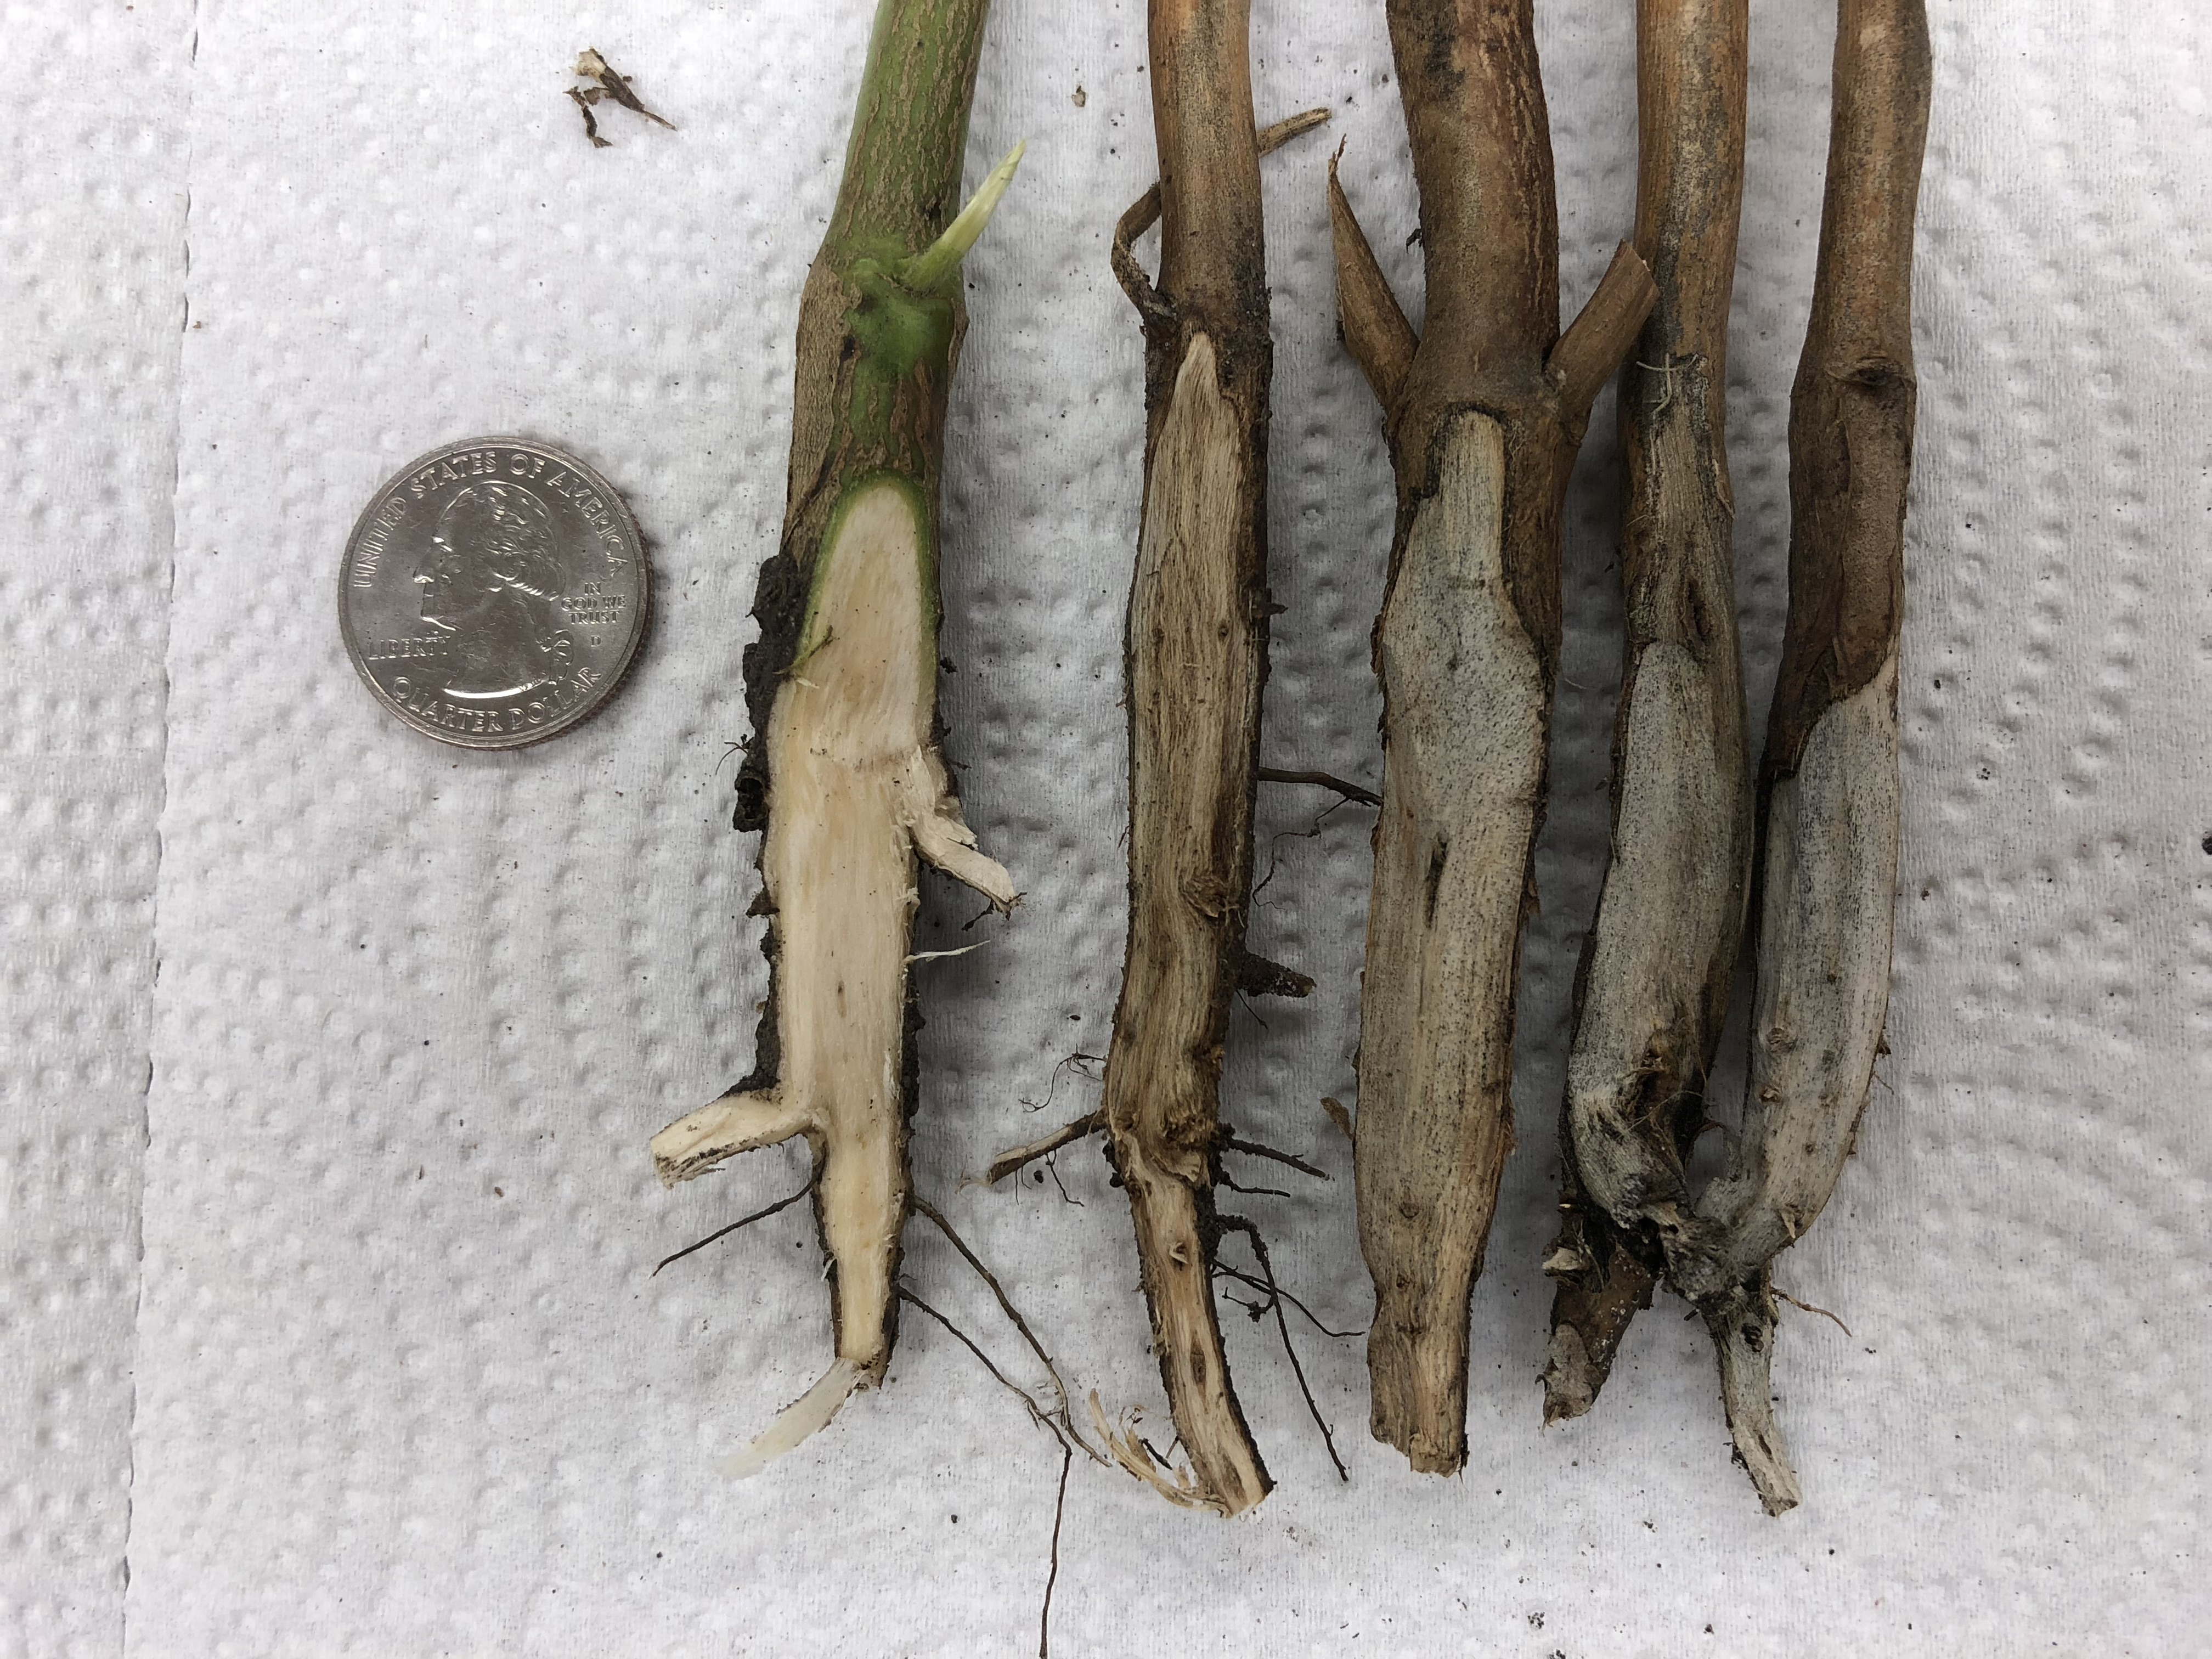 Five soybean stems with the outer tissue shave away. The inside of one of the stems is light in color. The other four are gray to black. A silver U.S. quarter is included in the photo for scale.